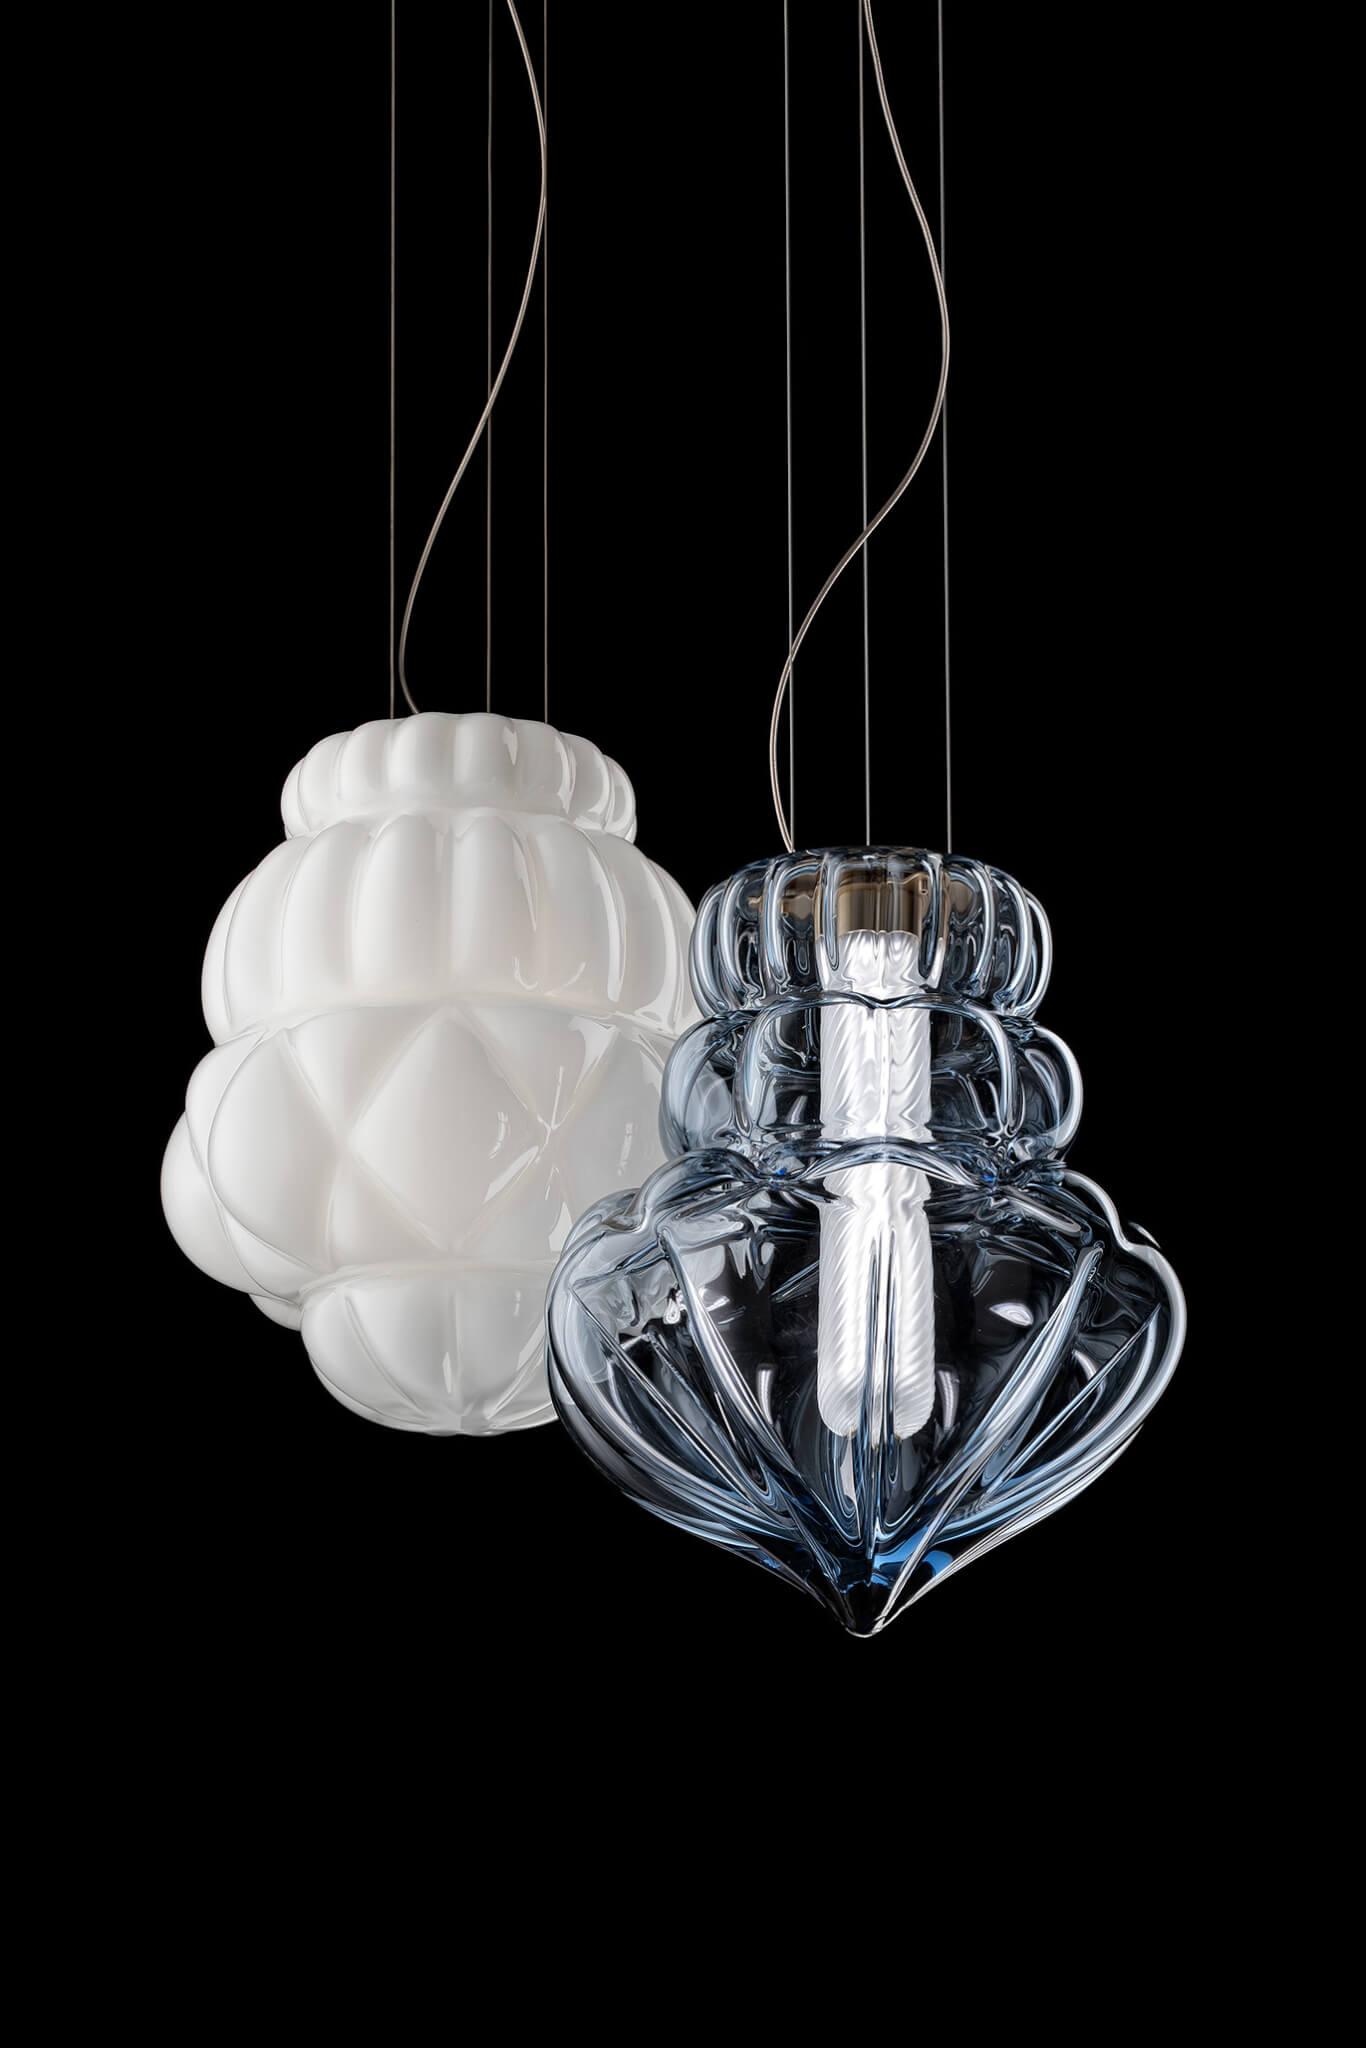 two light fixtures on translucent one transparent